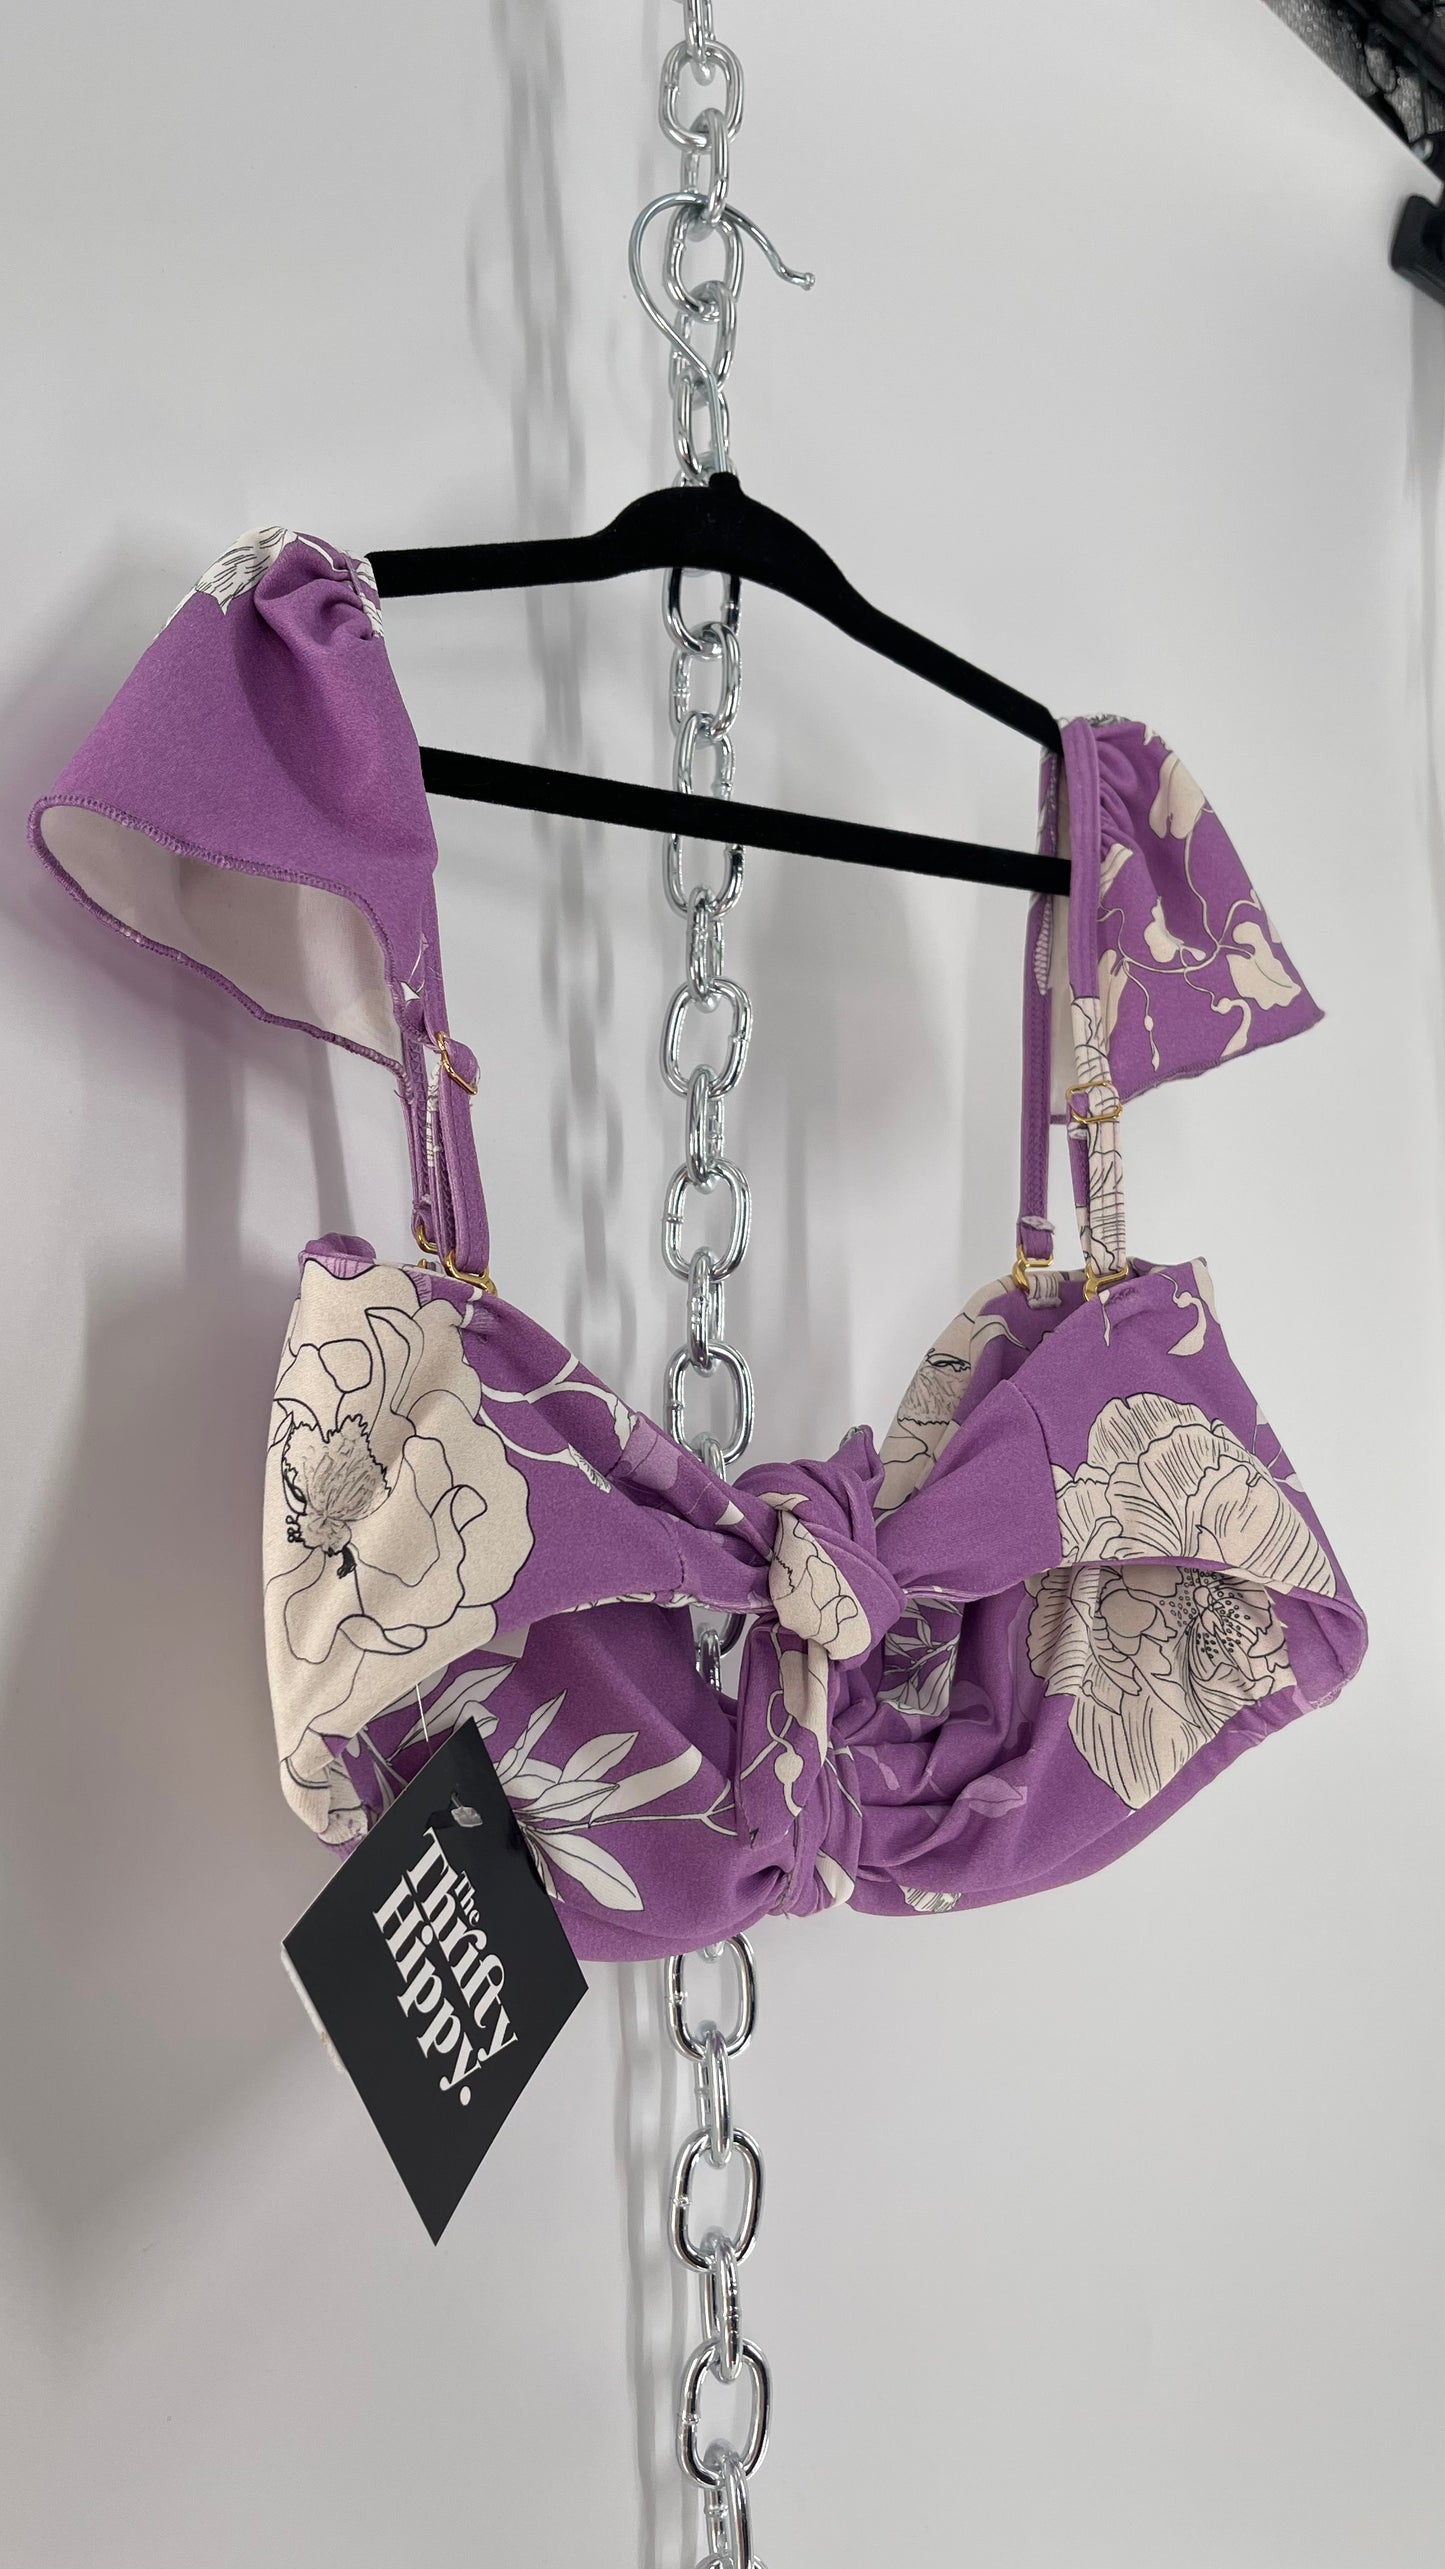 Montce Lilac Lavender Floral Swim Top with Tie Front and Ruffled Shoulder (Medium)